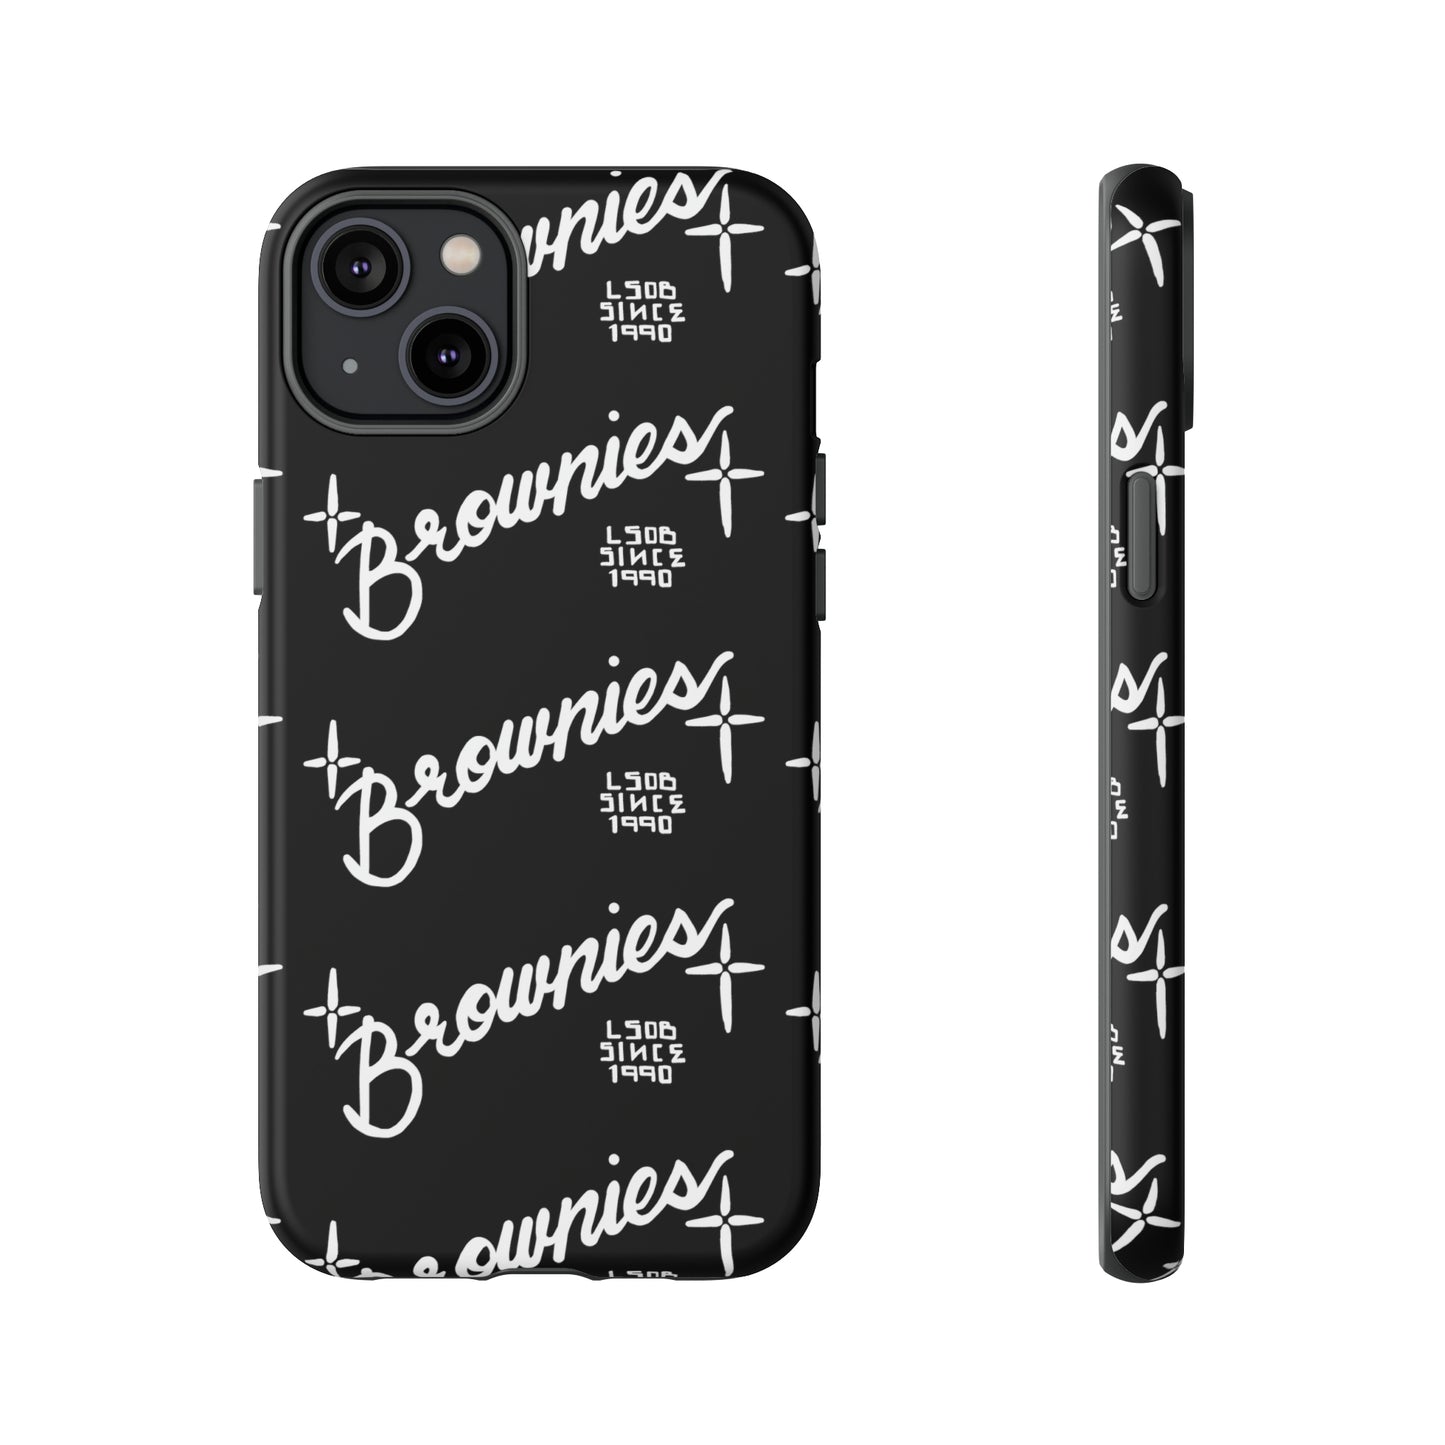 Brownies Cell Phone Case blk pattern